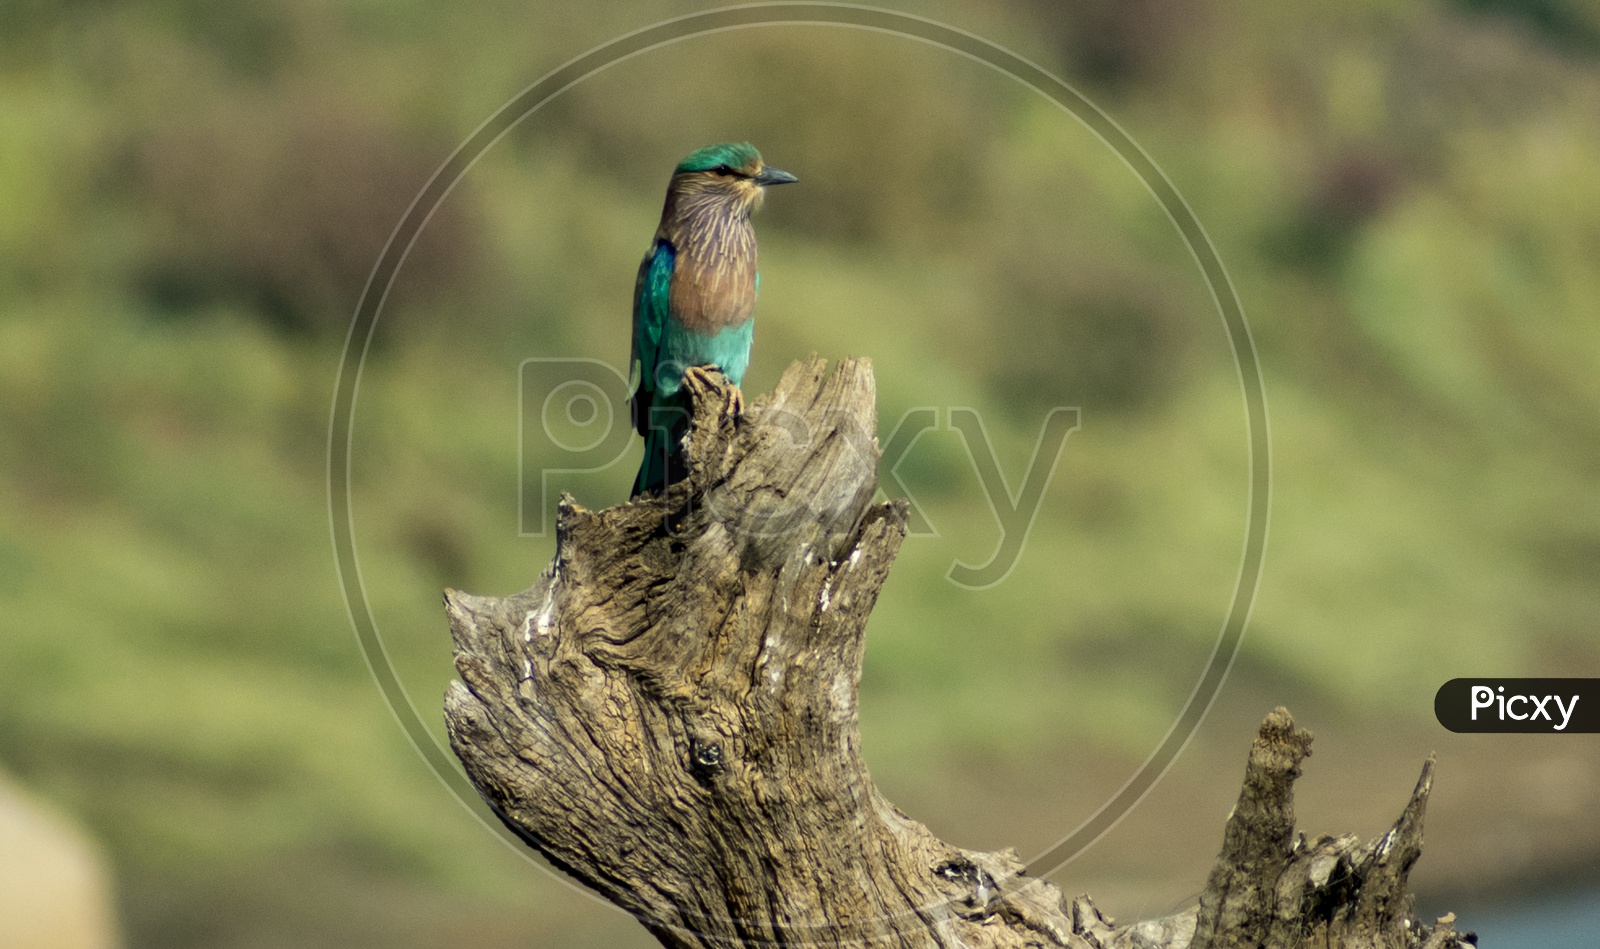 The indian roller